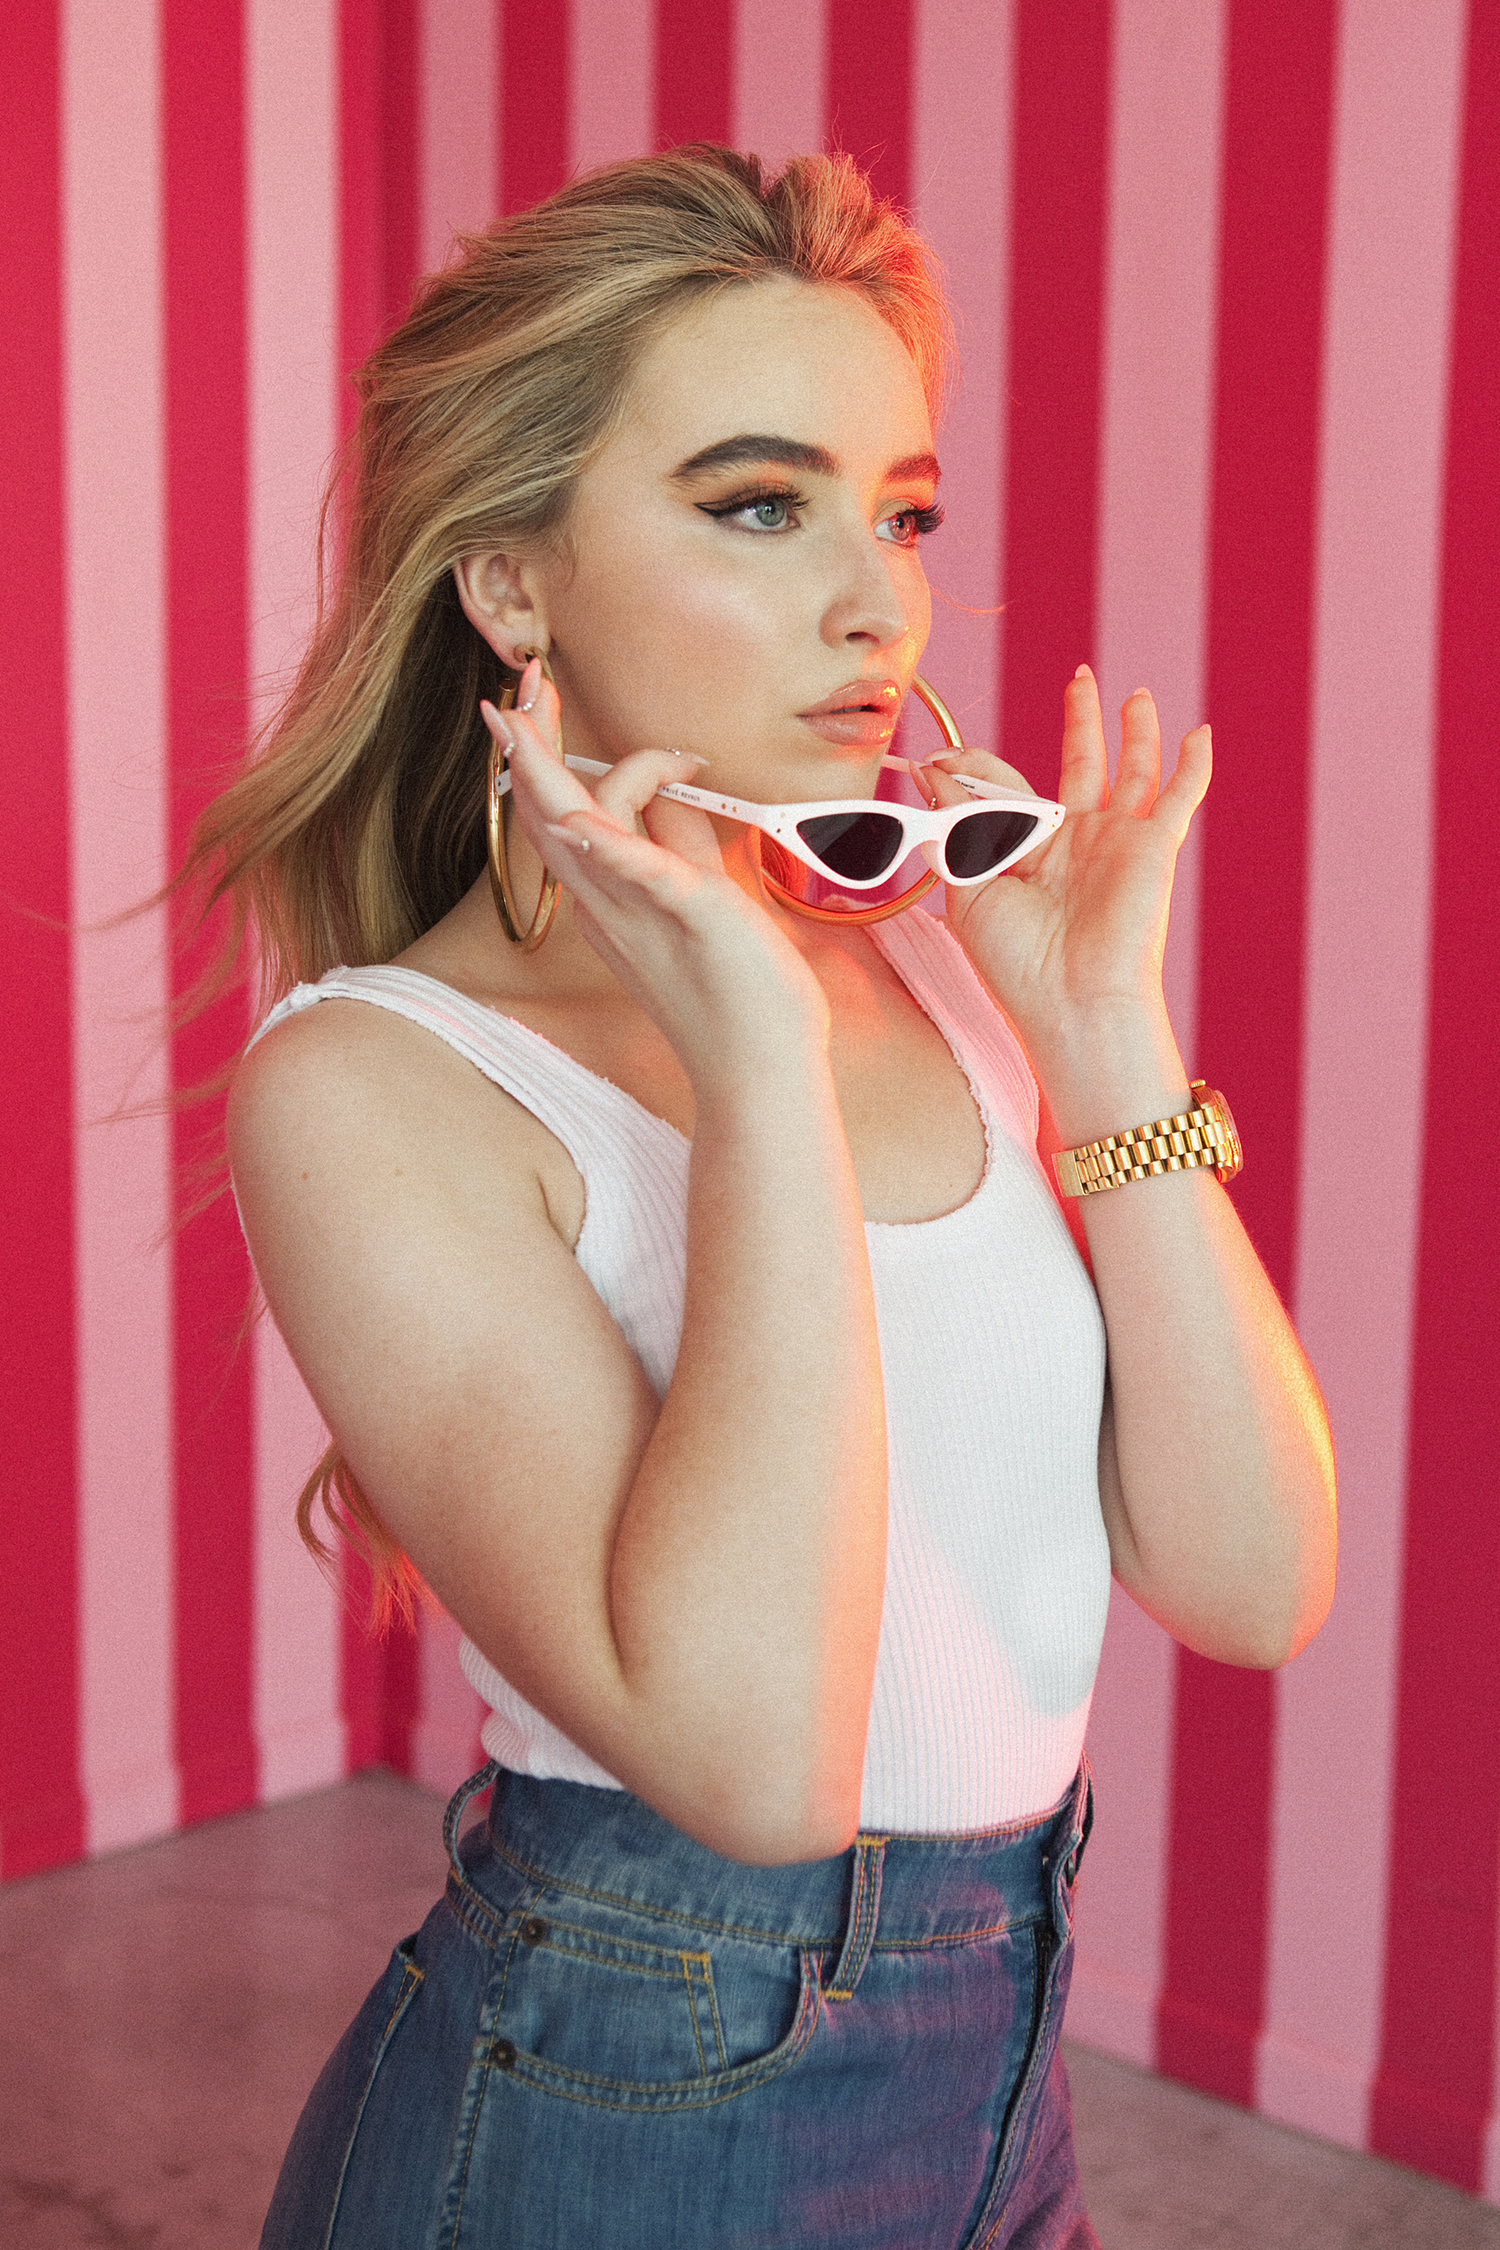 LADYGUNN – SABRINA LEADS A NEW GENERATION POP THE CHARTS